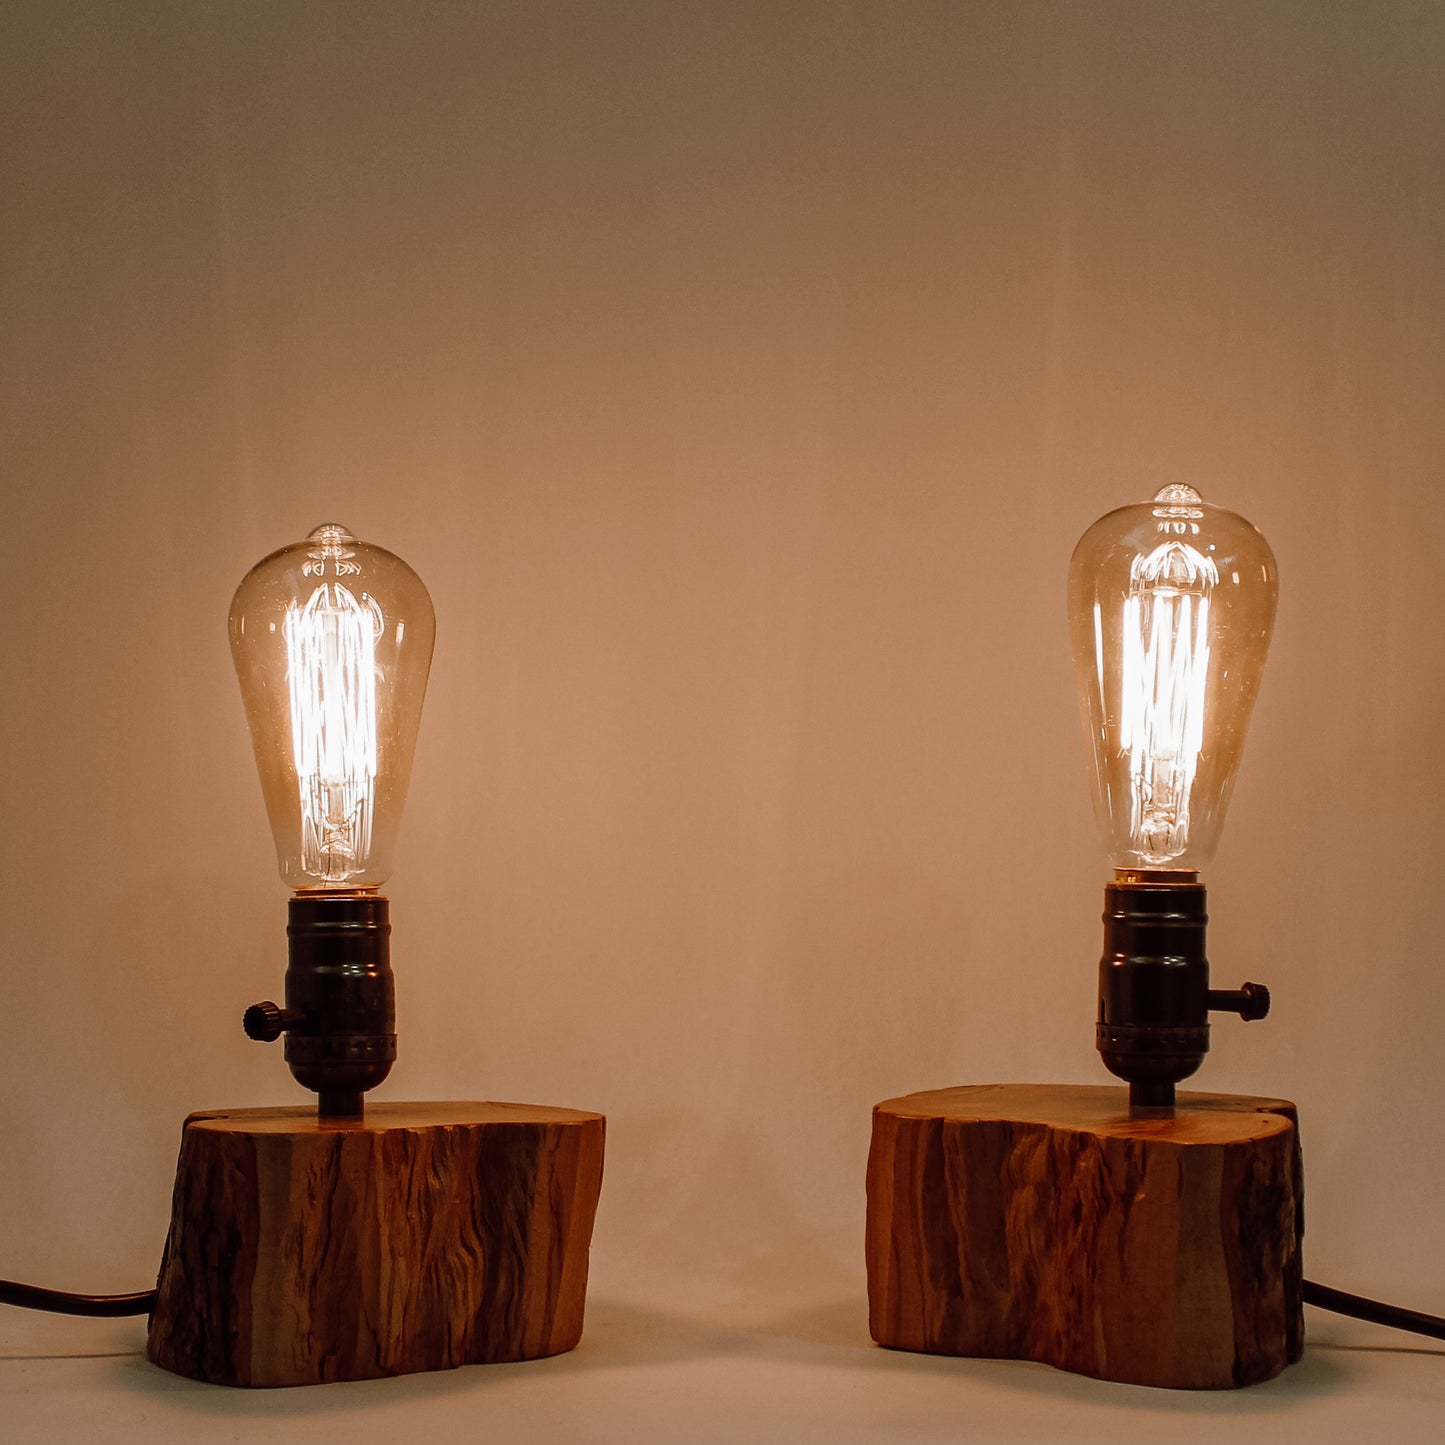 Olive tabletop  lamp (Right)